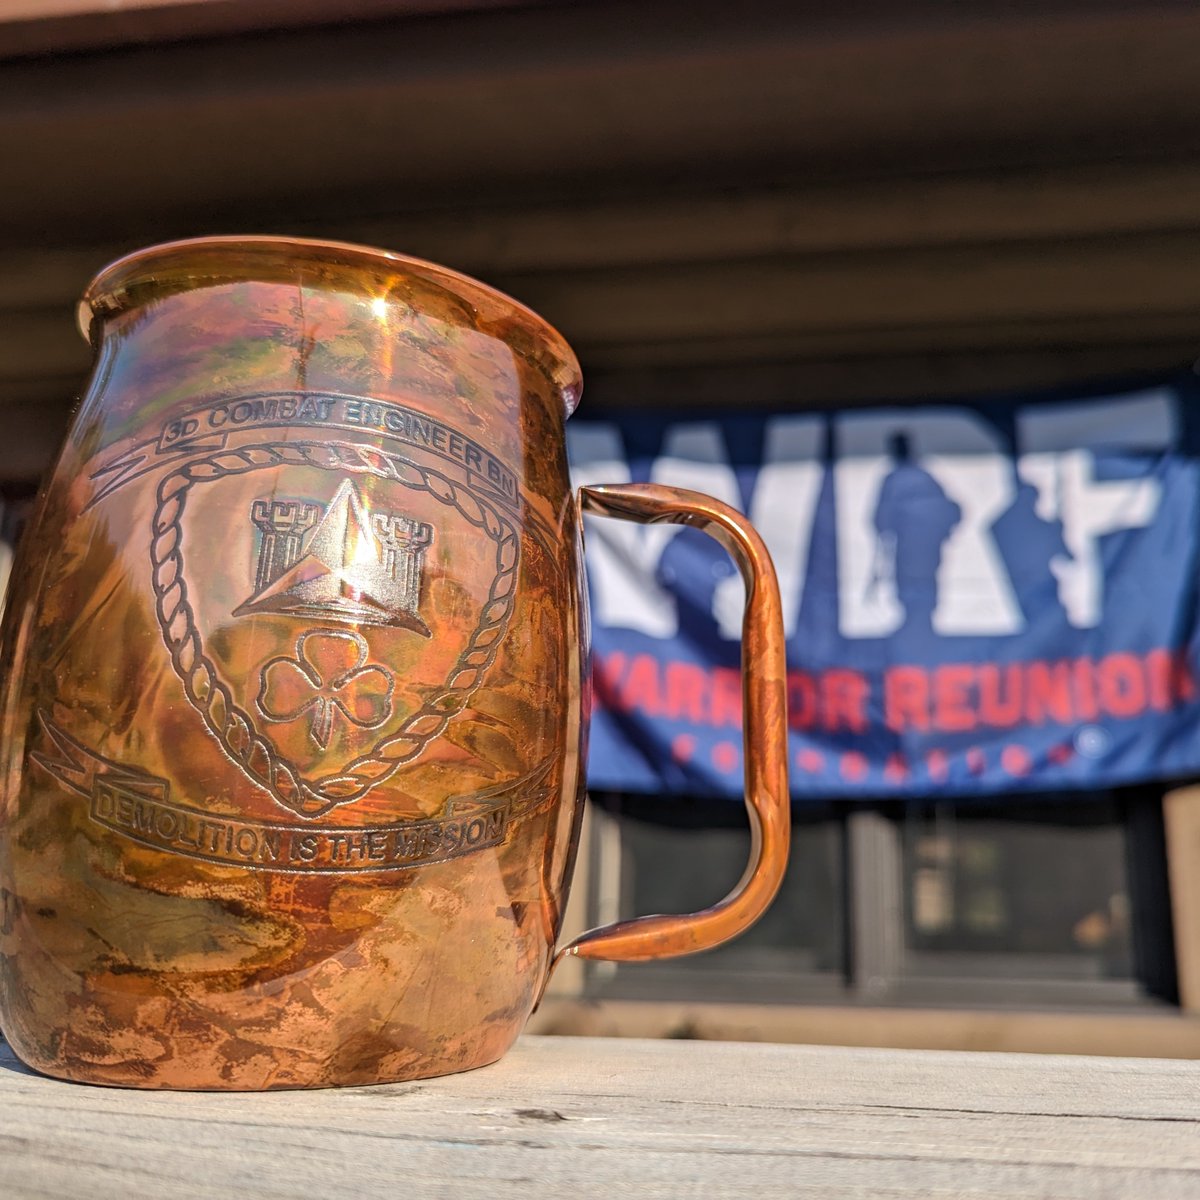 Sunrise over the 'Little Belts' on the first day of the 3rd CEB Reunion. WRF is honored to reunite these veterans after 10+ years since they served together in Iraq and Afghanistan. Thanks to @WildBillsSoda for the custom mugs commemorating this occasion. #CombatVeterans #Reunite